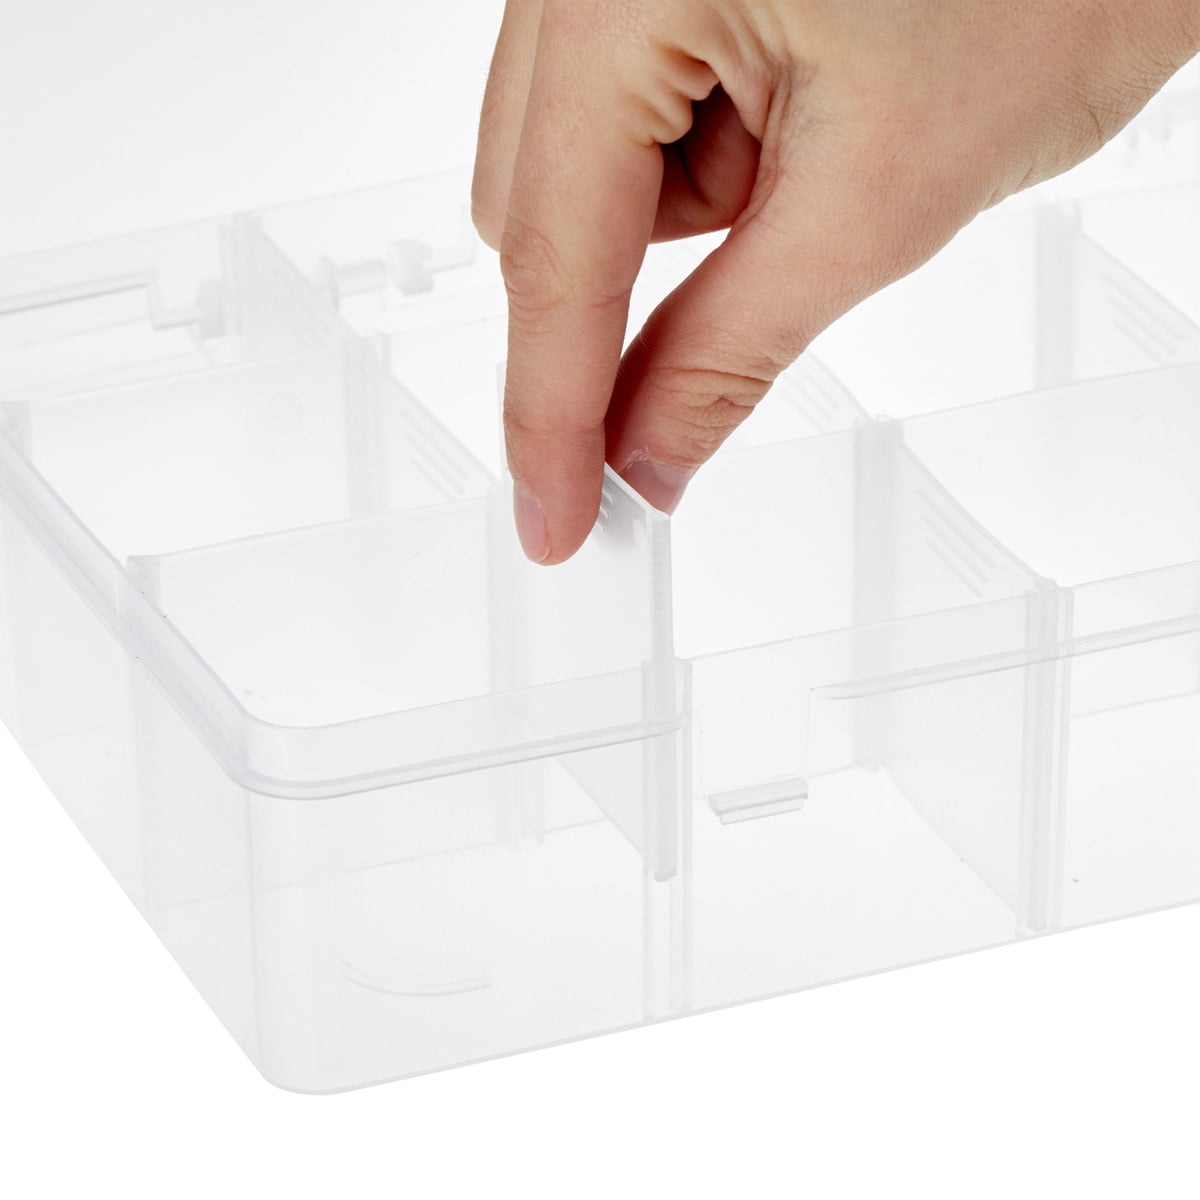 15 Grid Transparent Jewelry Bead Organizer Box With Adjustable Slots High  Quality Plastic 5x10 Storage Unit Solution From Chaplin, $0.69